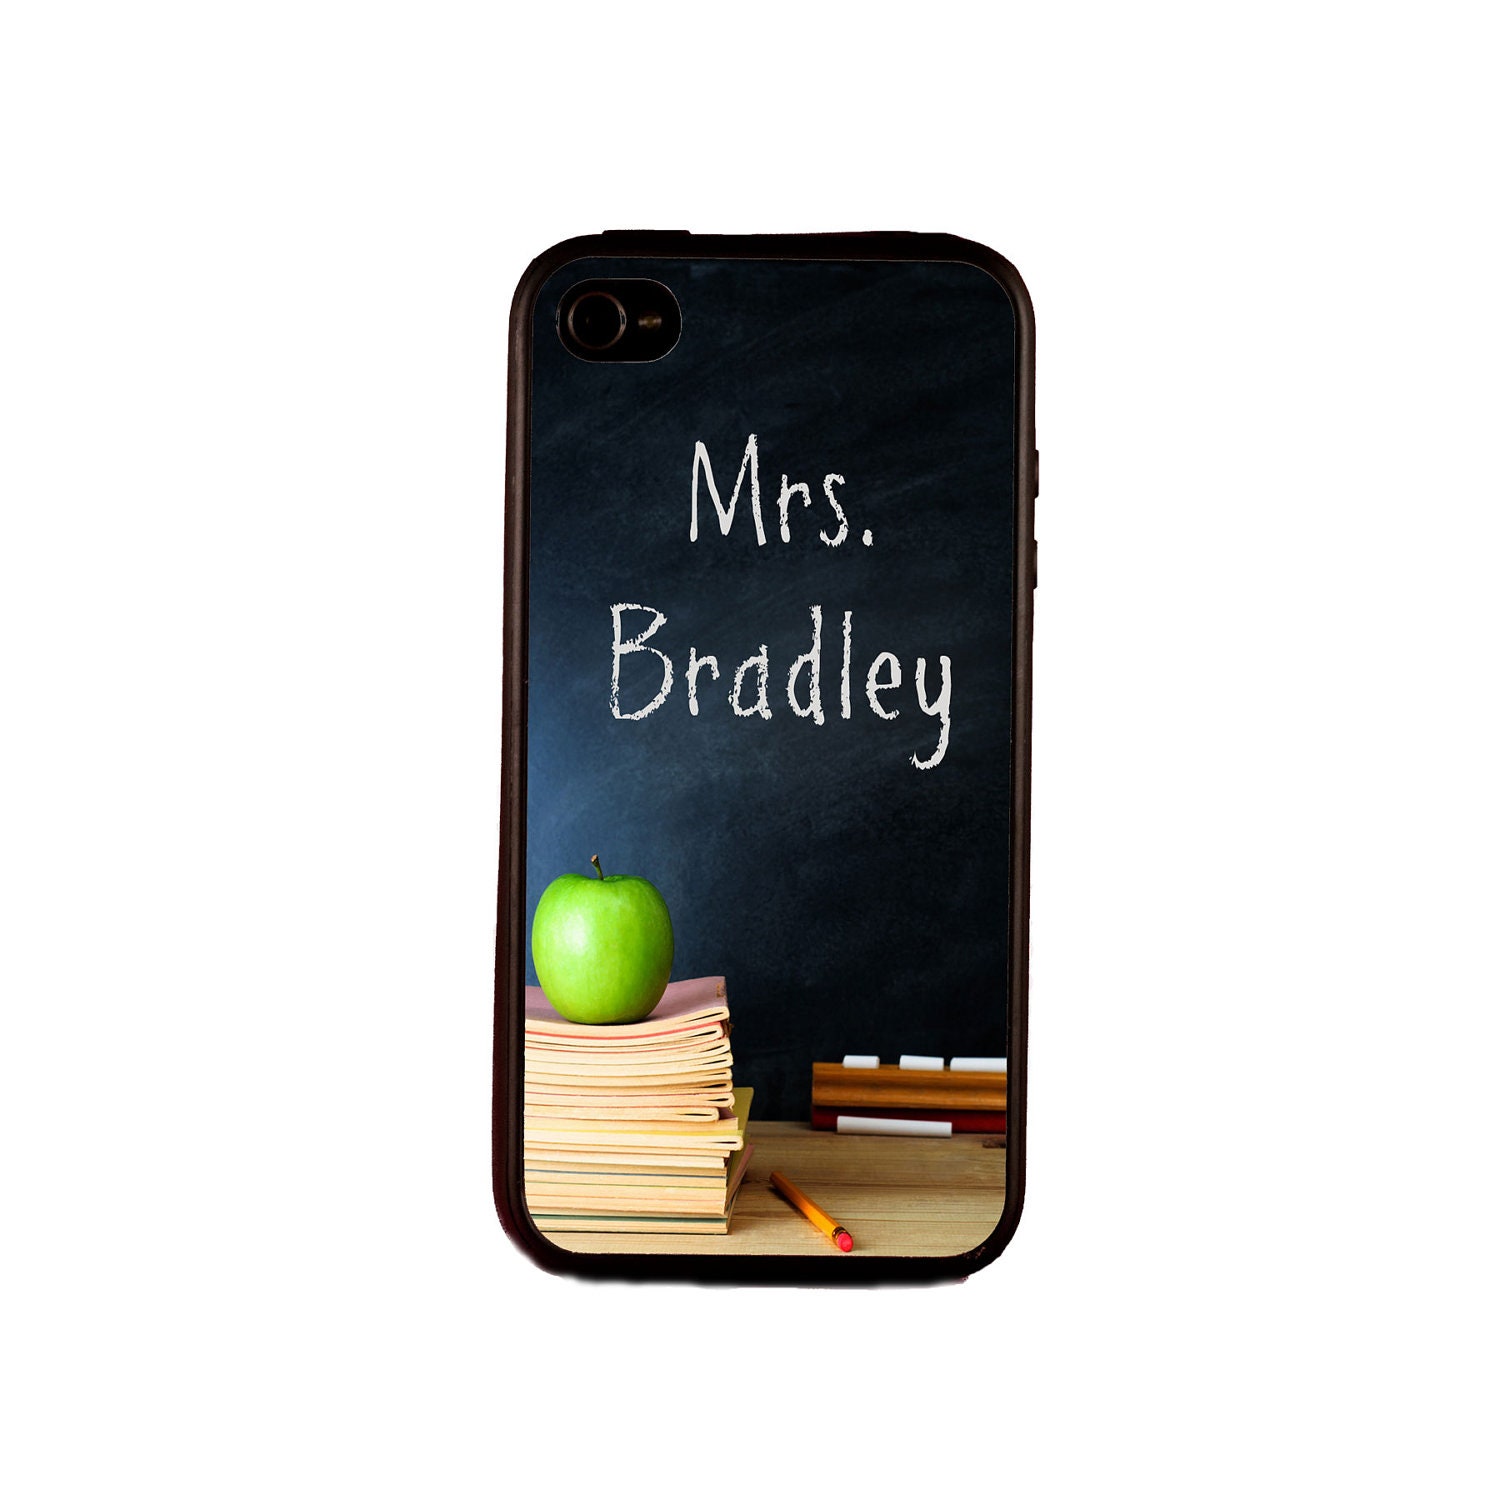 Personalized iPhone 5 case. Custom iPhone 5 case. Available for iPhone 4 or 4S. Monogrammed iPhone 5 case. "The Teacher"